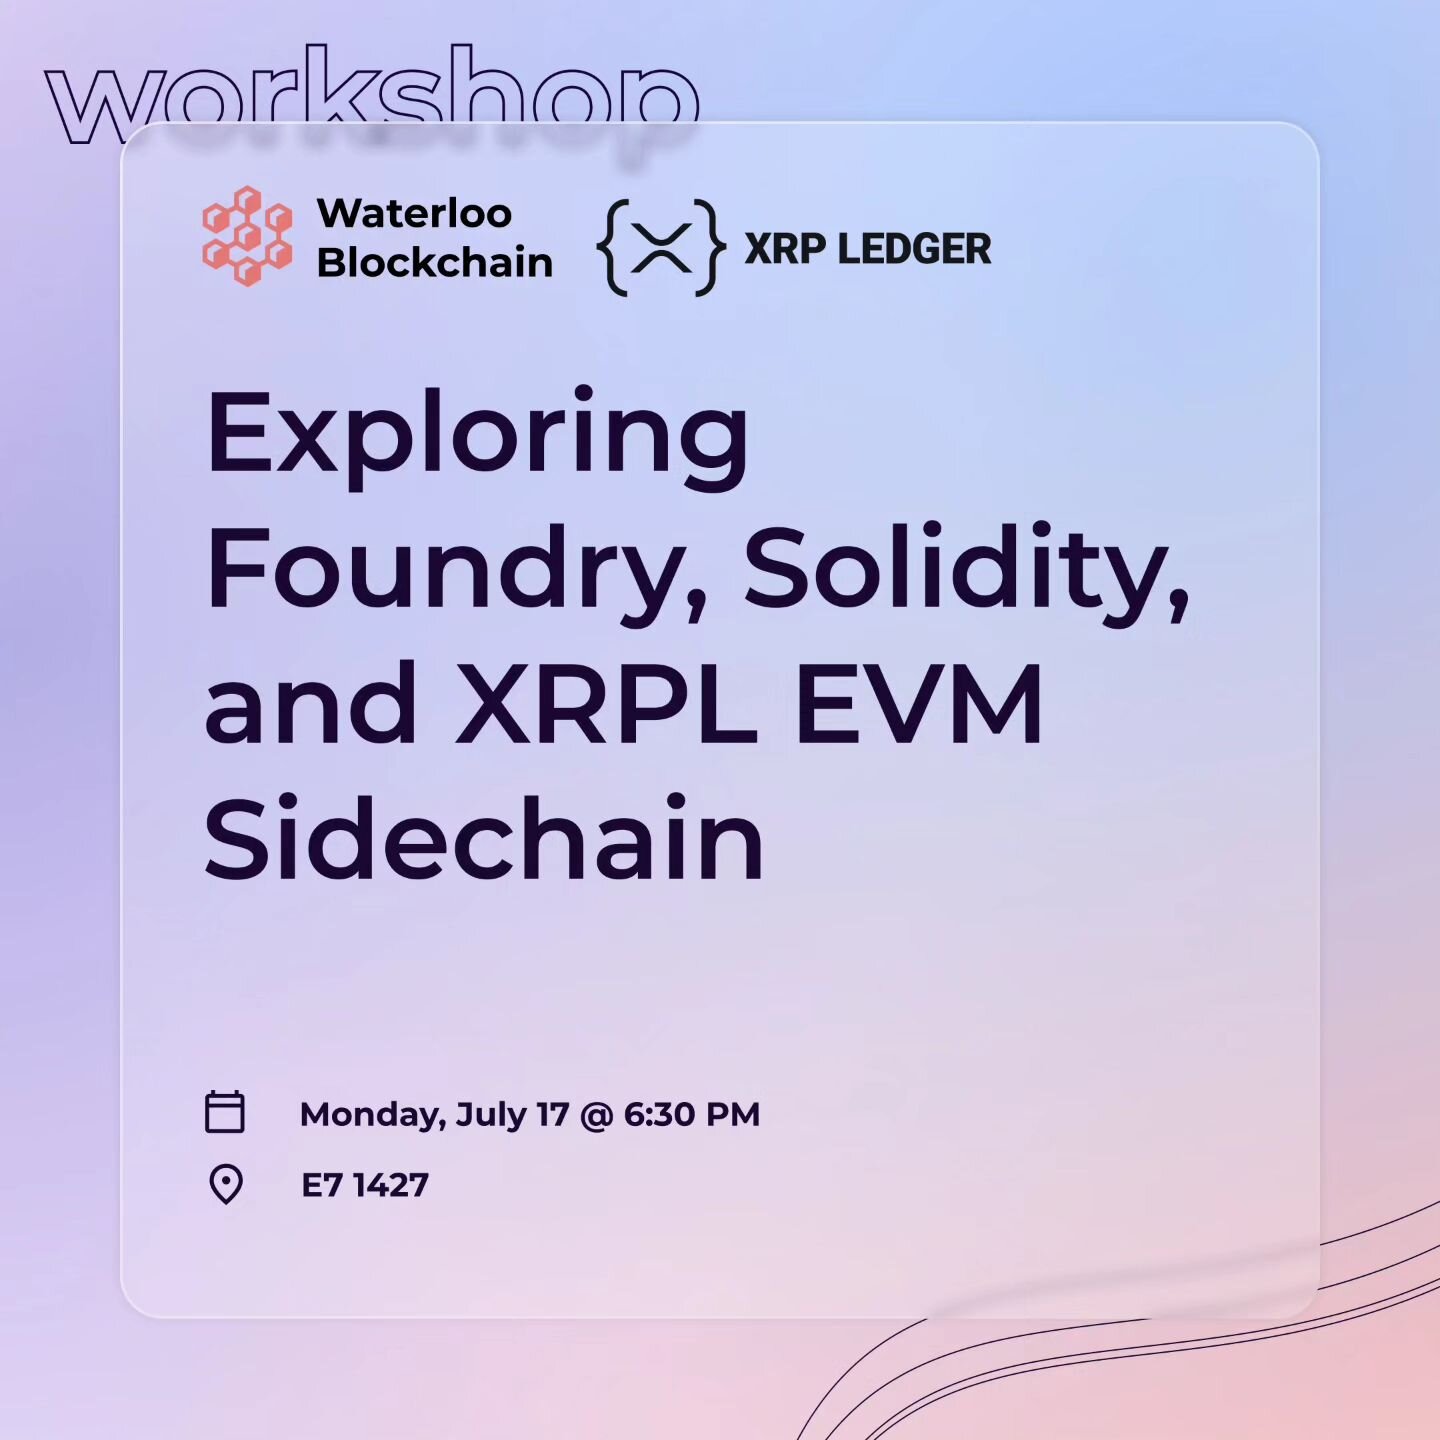 Get Ready to Explore Foundry, Solidity, and XRPL EVM Sidechain! 🎉

Hosted by Ripple, a renowned leader in blockchain technology, this workshop is your chance to learn from industry experts and explore the exciting realms of decentralized finance.💡
